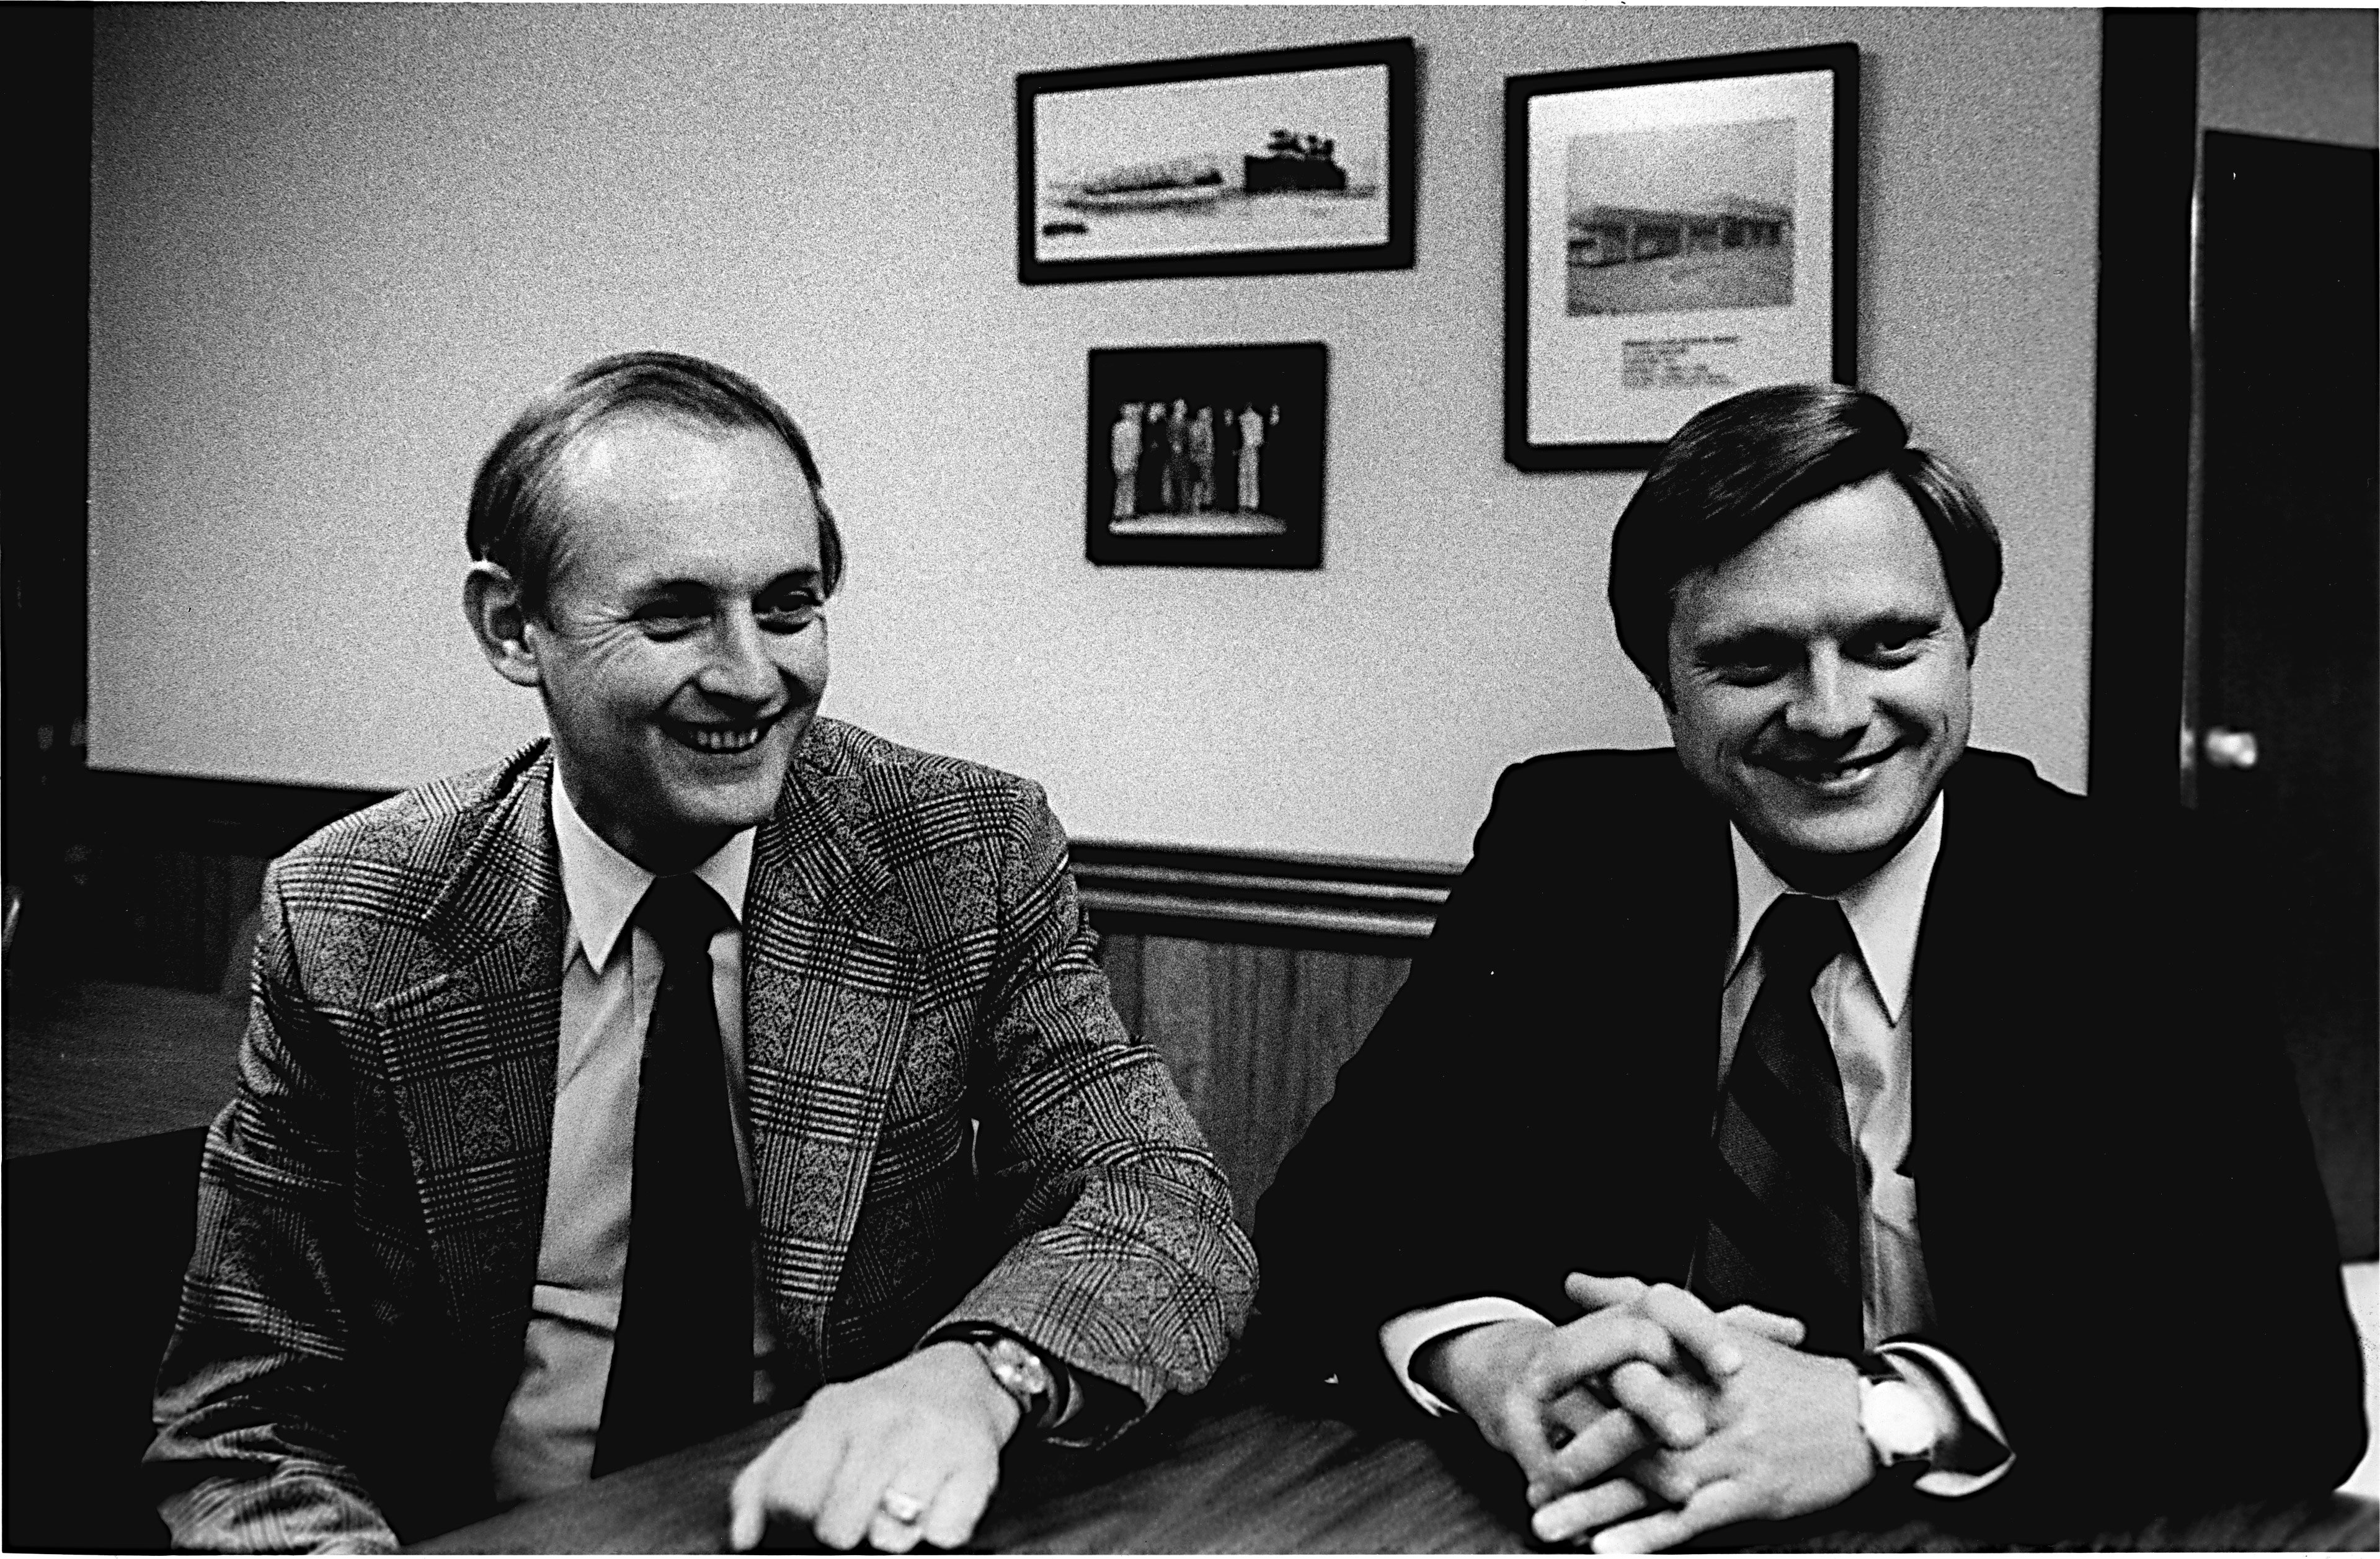 A photo of Roger Dierberg and Bob Dierberg circa 1977, sitting at a table in an office, both wearing suit jackets and ties, smiling as they speak to someone off camera.